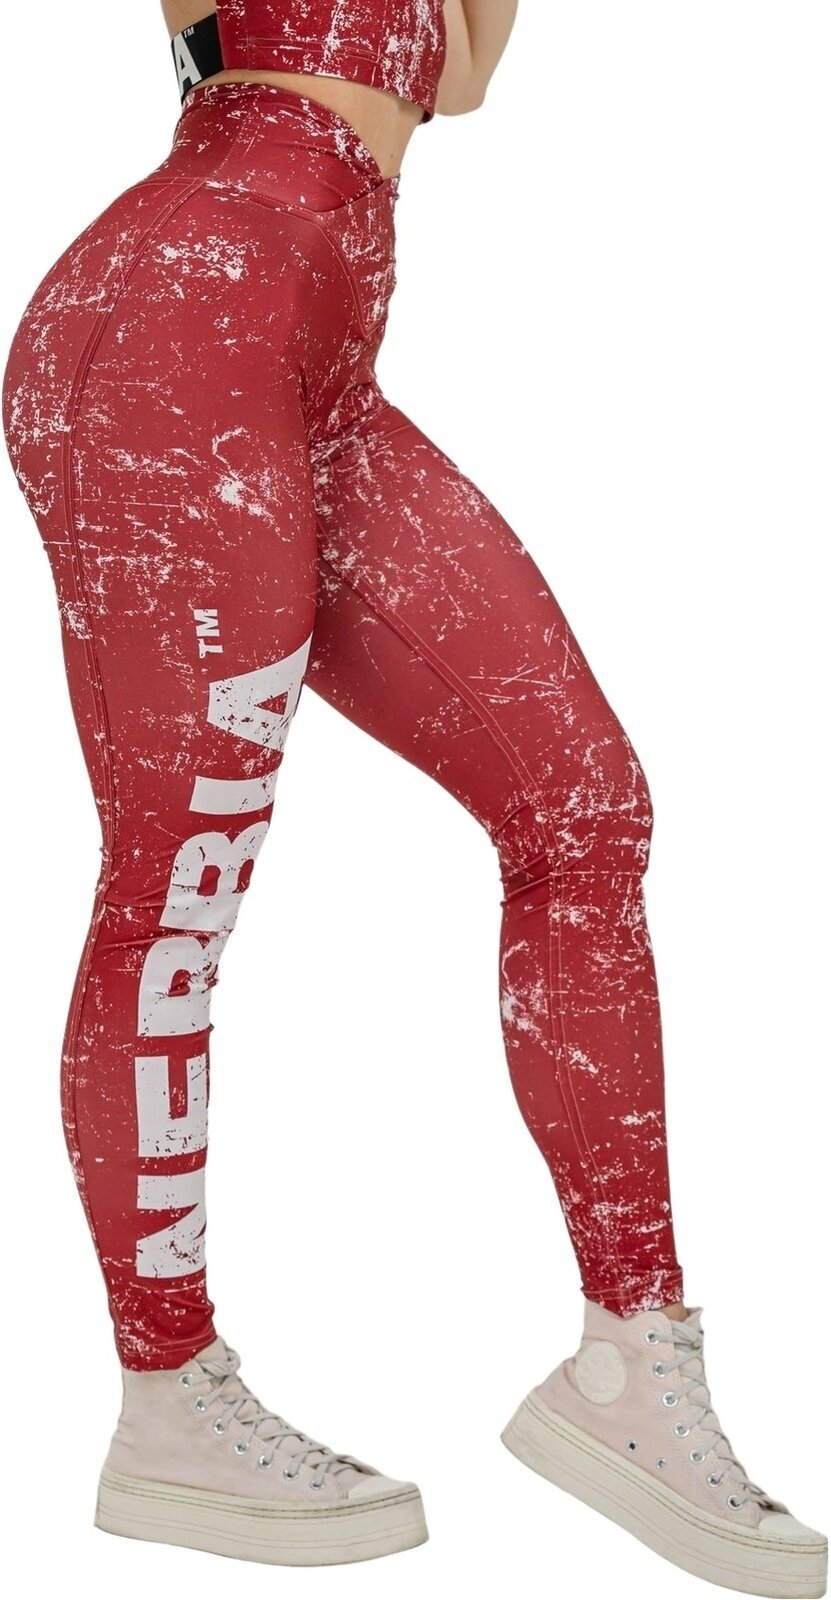 Fitness Hose Nebbia Workout Leggings Rough Girl Red XS Fitness Hose